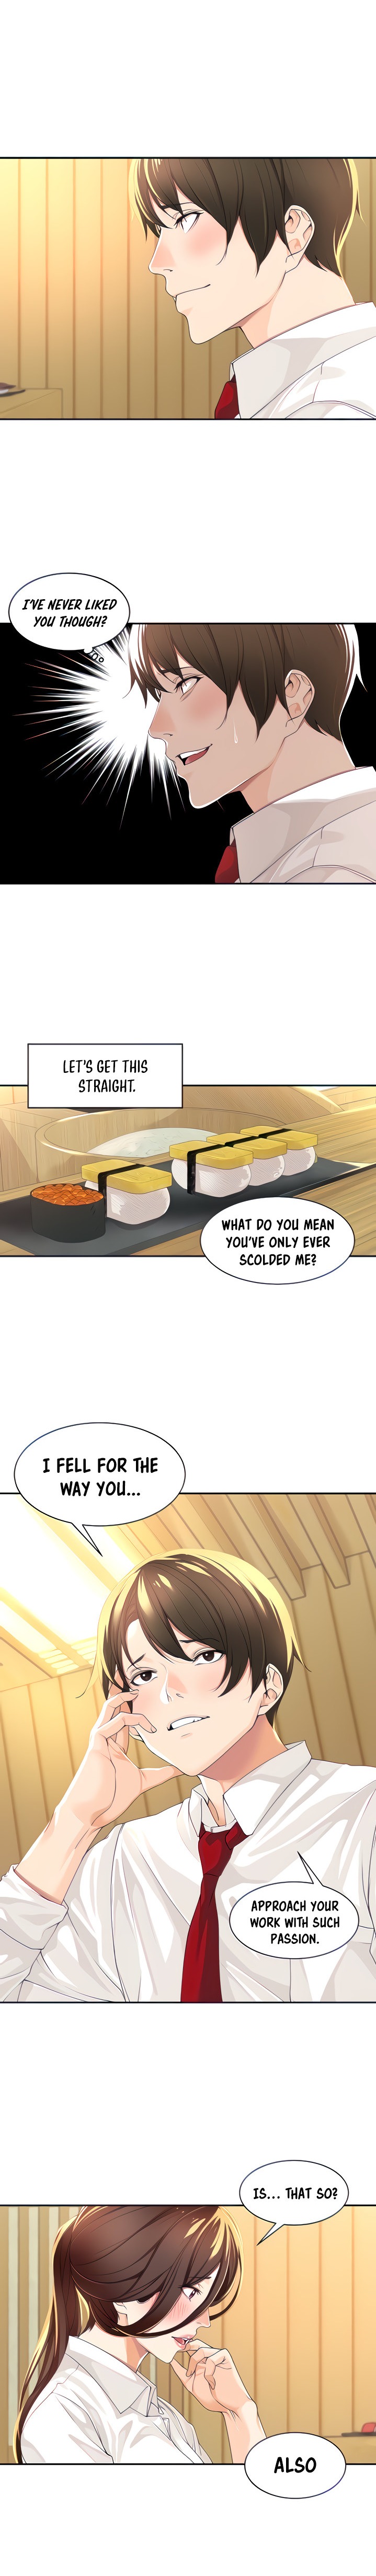 Manager, Please Scold Me - Chapter 2 Page 6